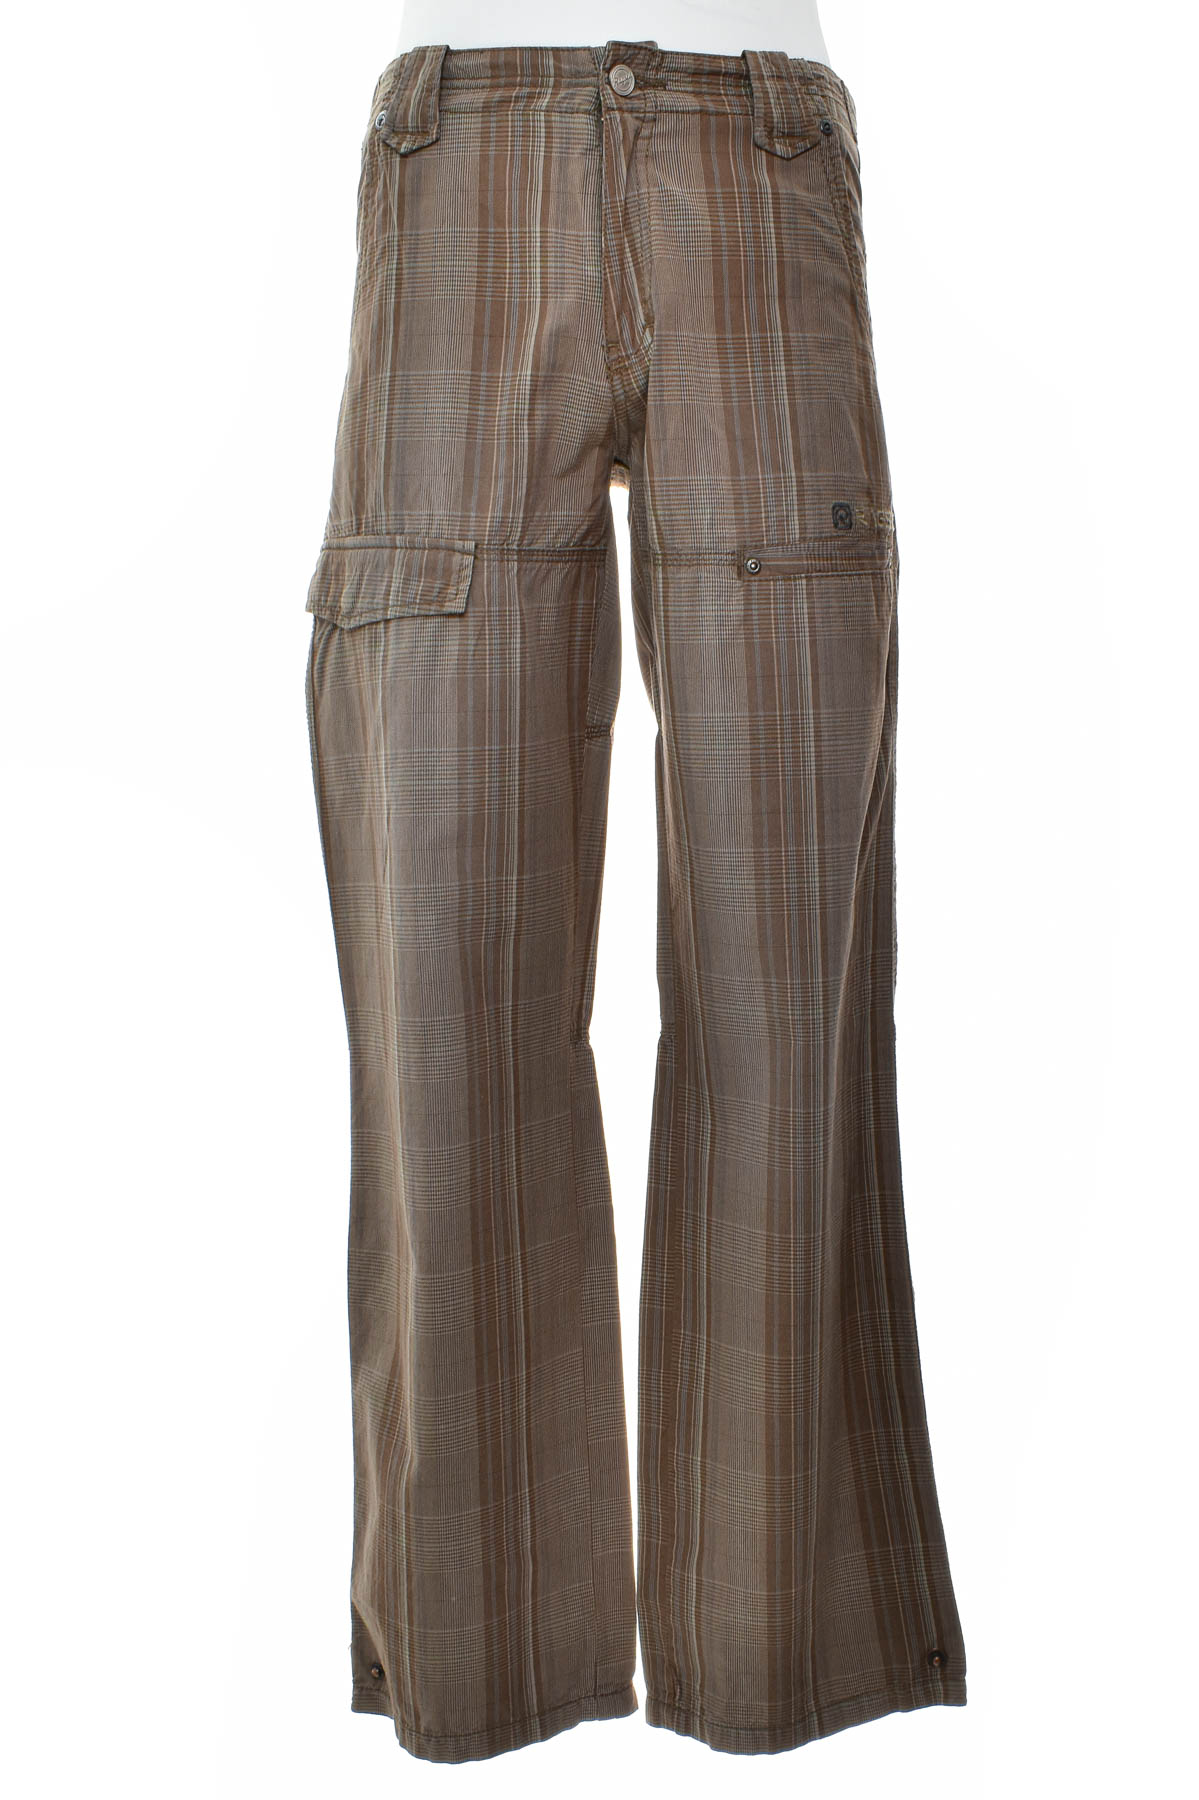 Trousers for boy - RagsCo - 0